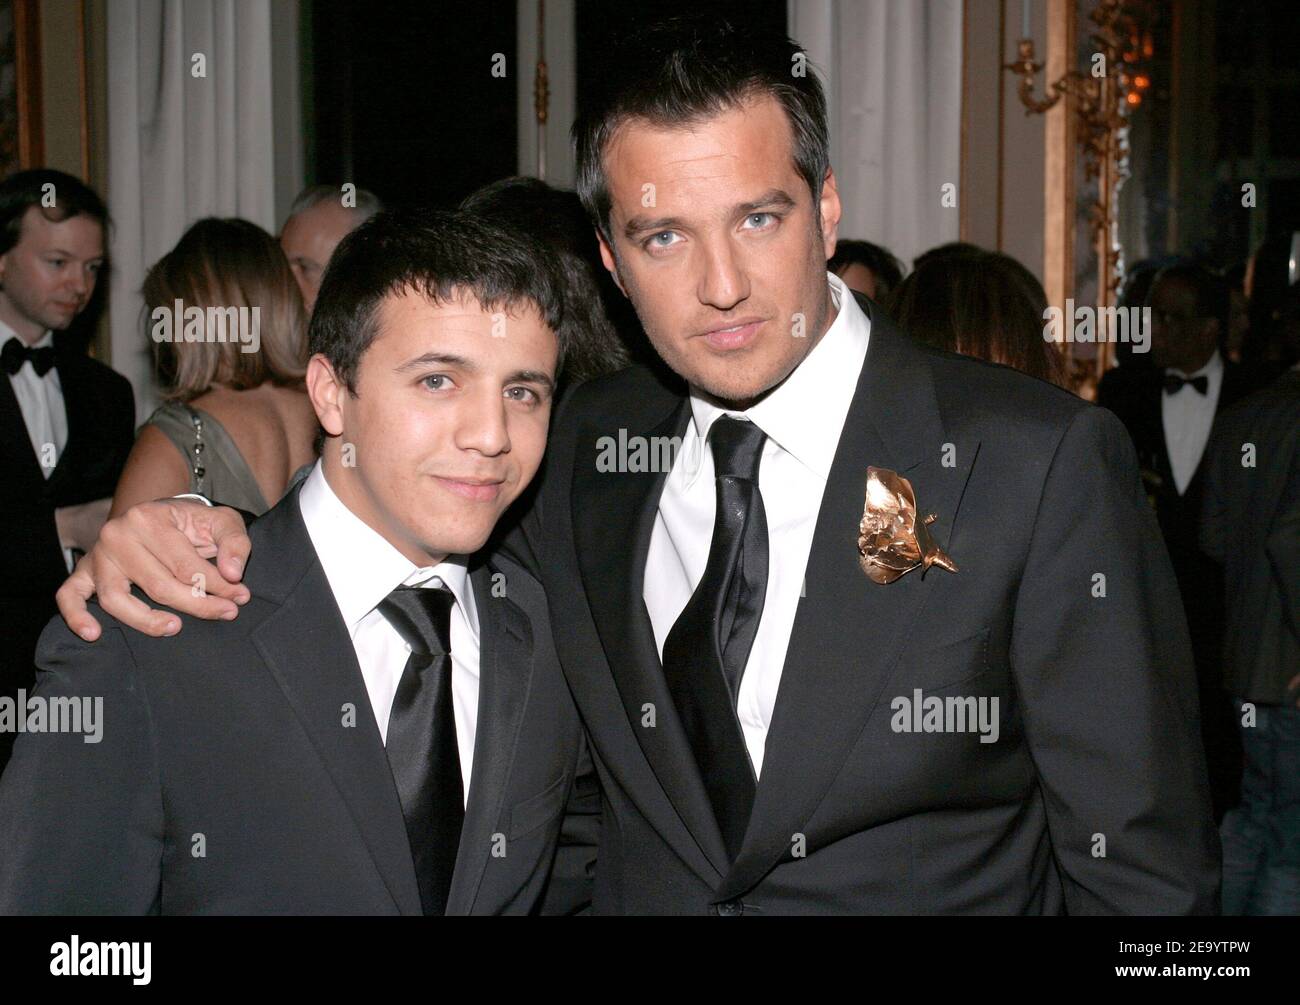 Algerian born rai singer Faudel (L) and former singer Brian (ex-'Alliage') attend the Haute-Couture Ball organized by Lebanese fashion designer Elie Saab at La Maison Baccarat in Paris, France, on January 24, 2005. Photo by Benoit Pinguet/ABACA. Stock Photo